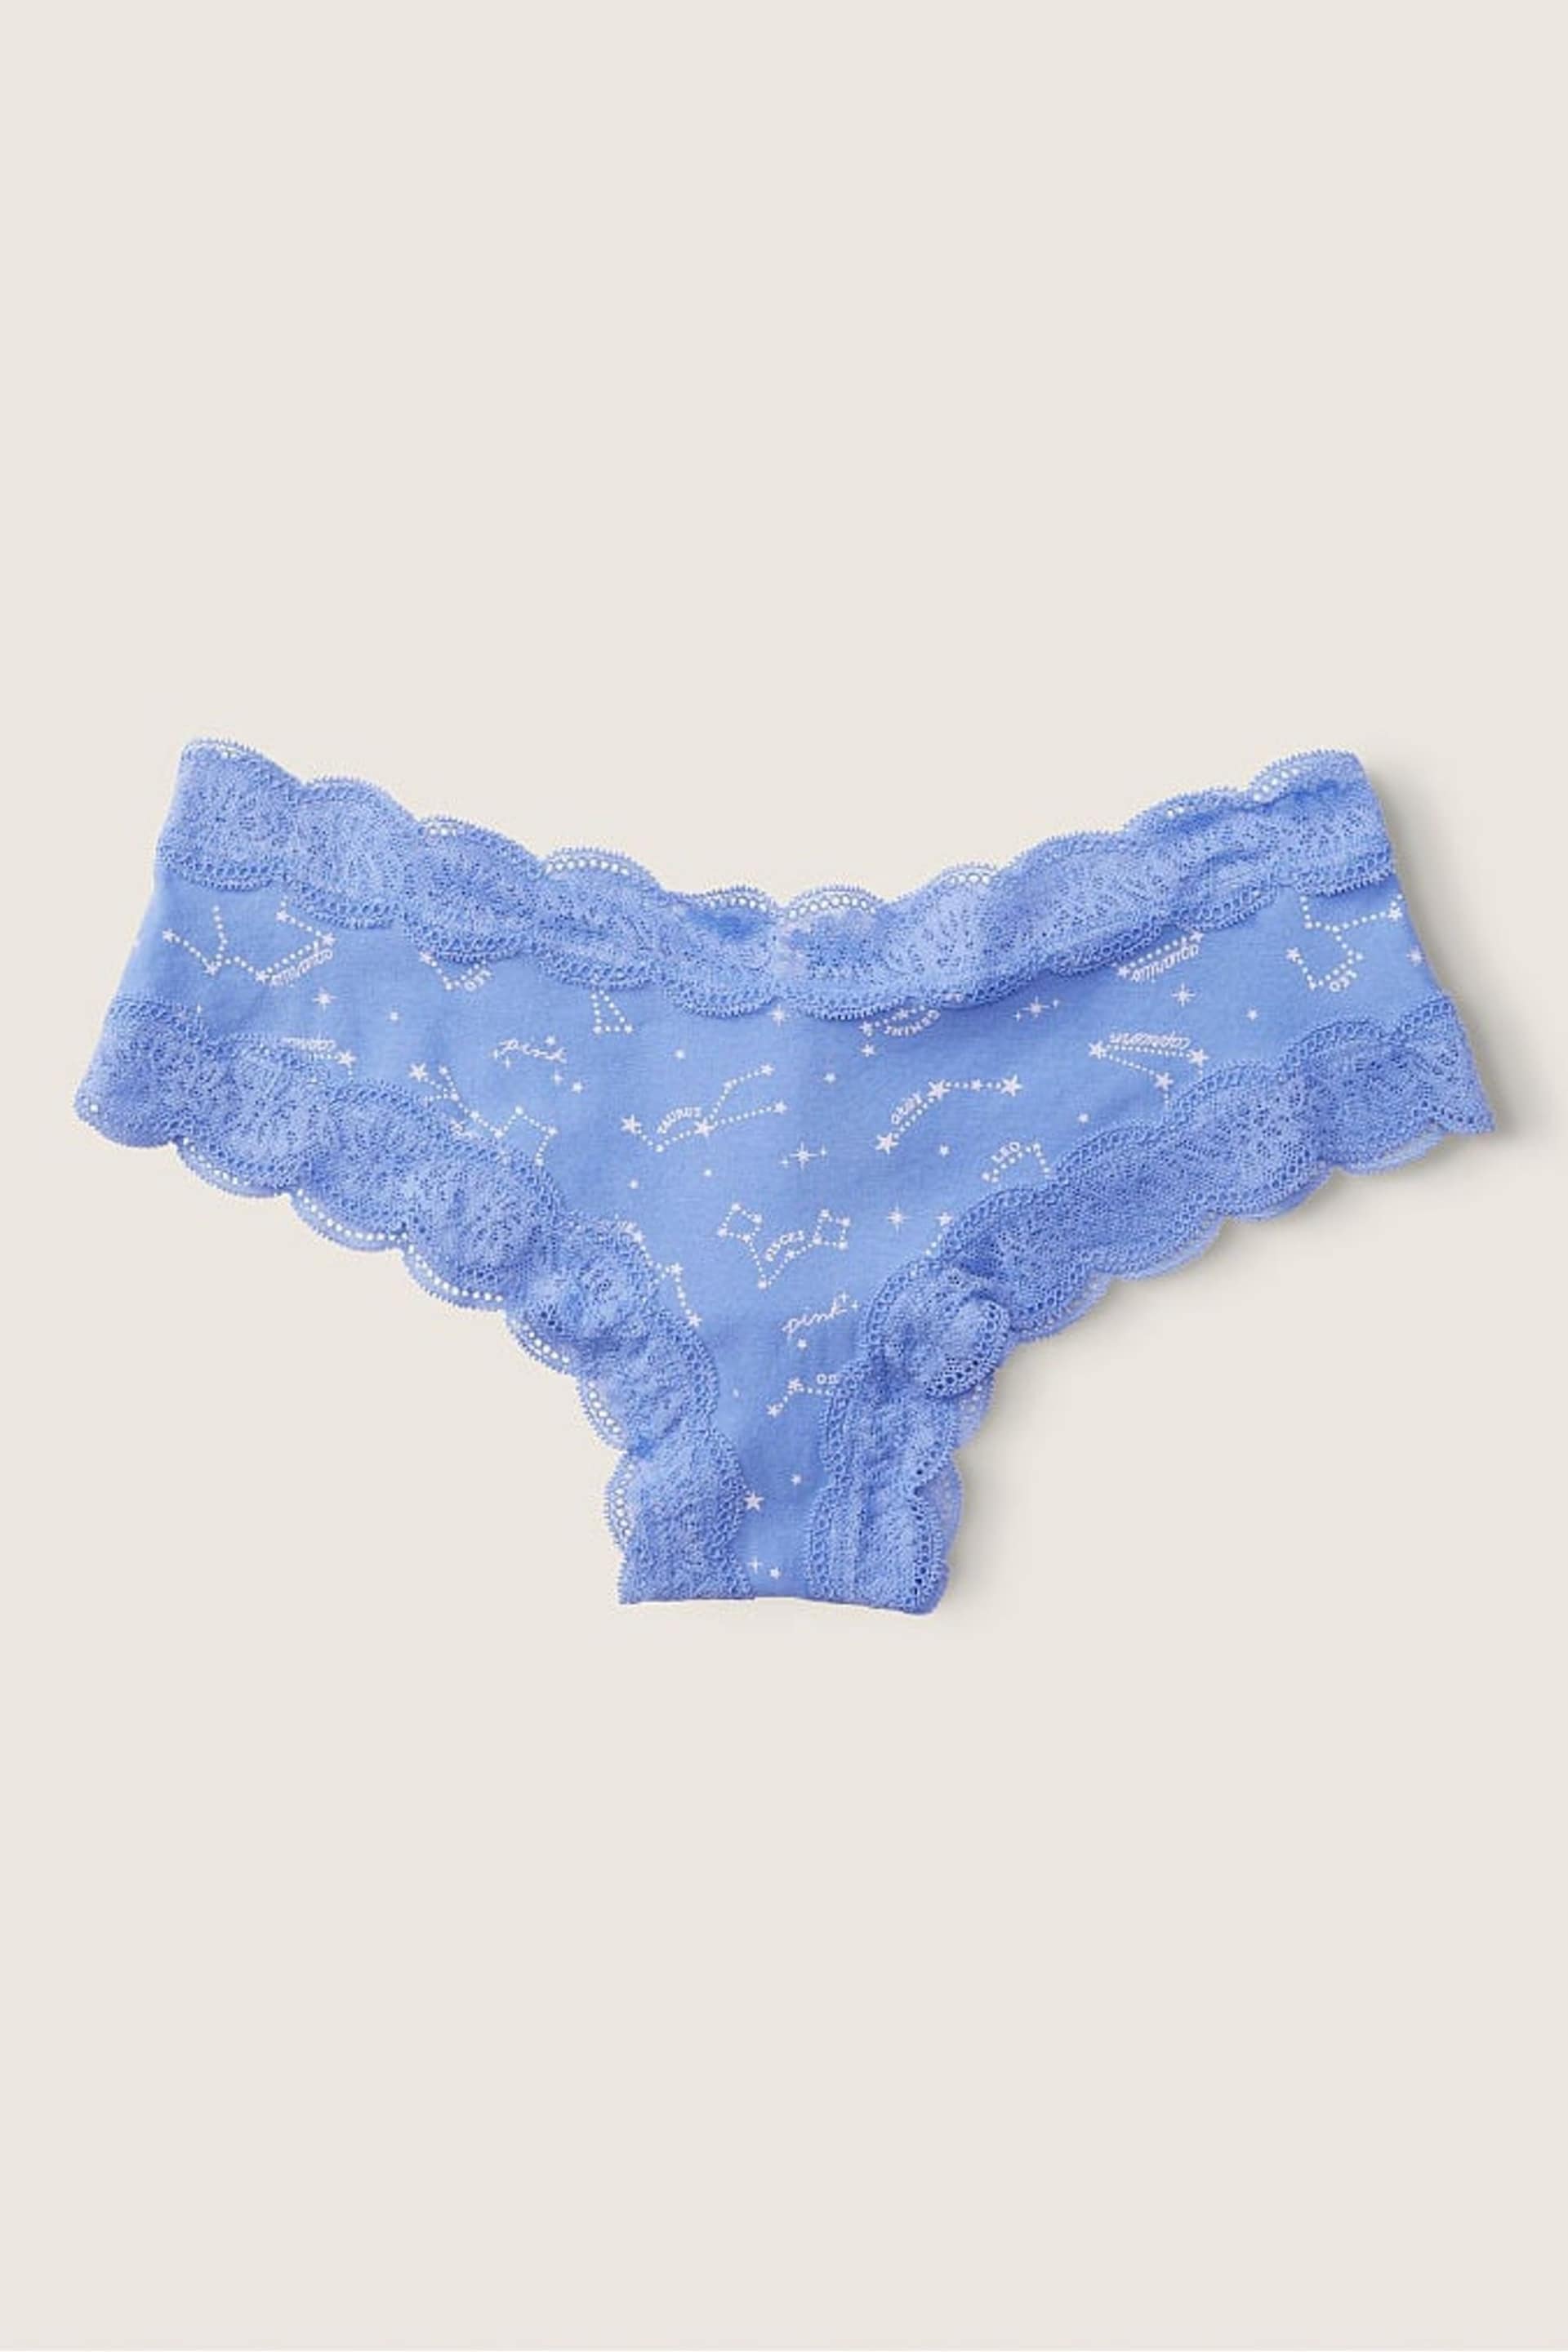 Victoria's Secret PINK Cornflower Blue Constellation Print Blue Lace Trim Cheeky Knickers - Image 1 of 1